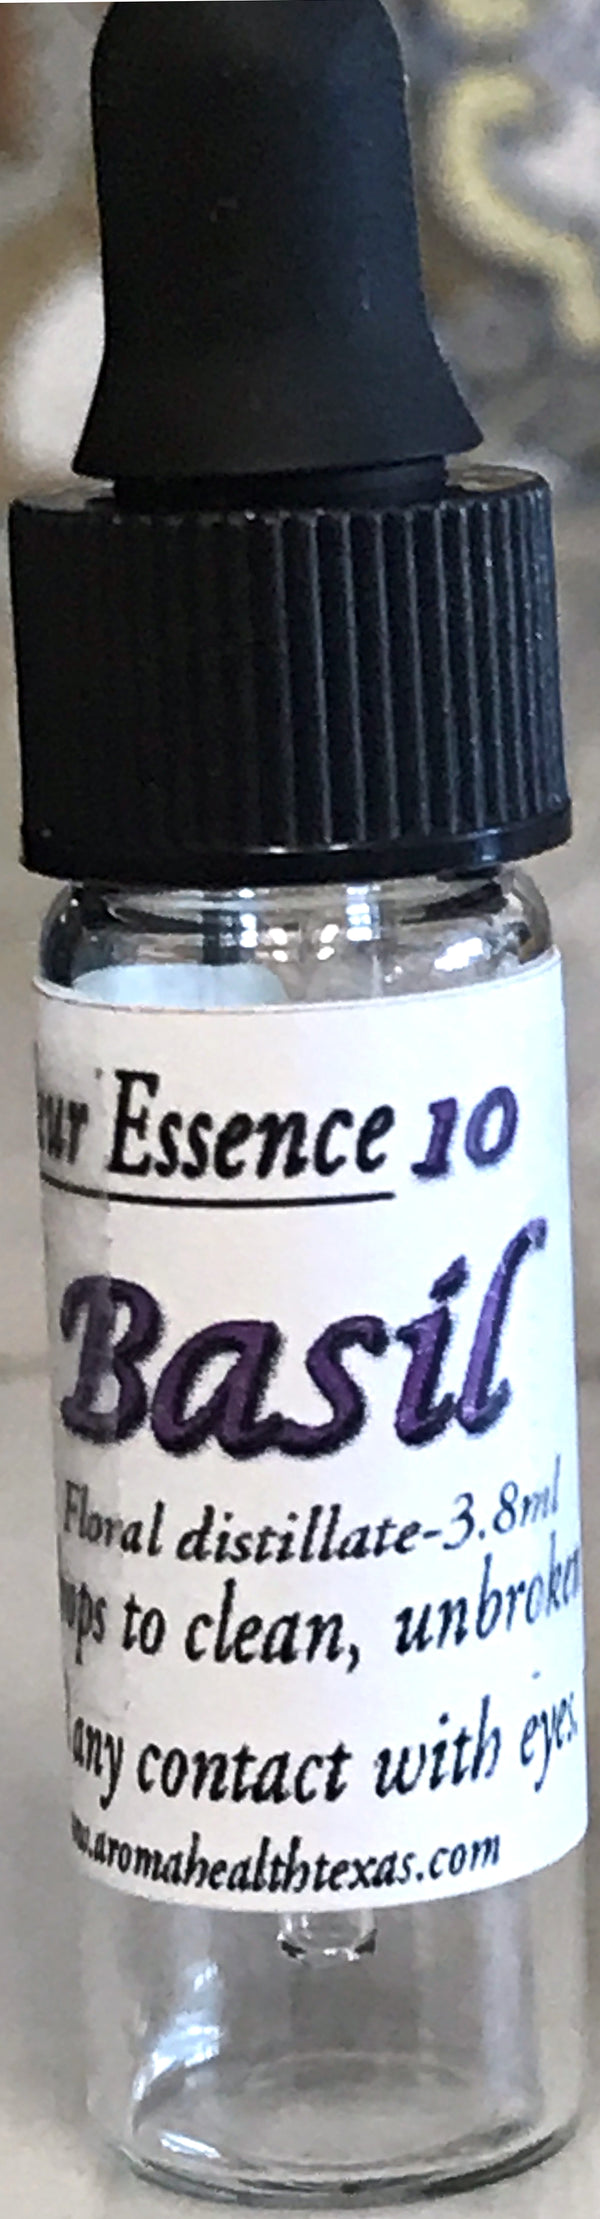 Picture of Basil Flower Eseence